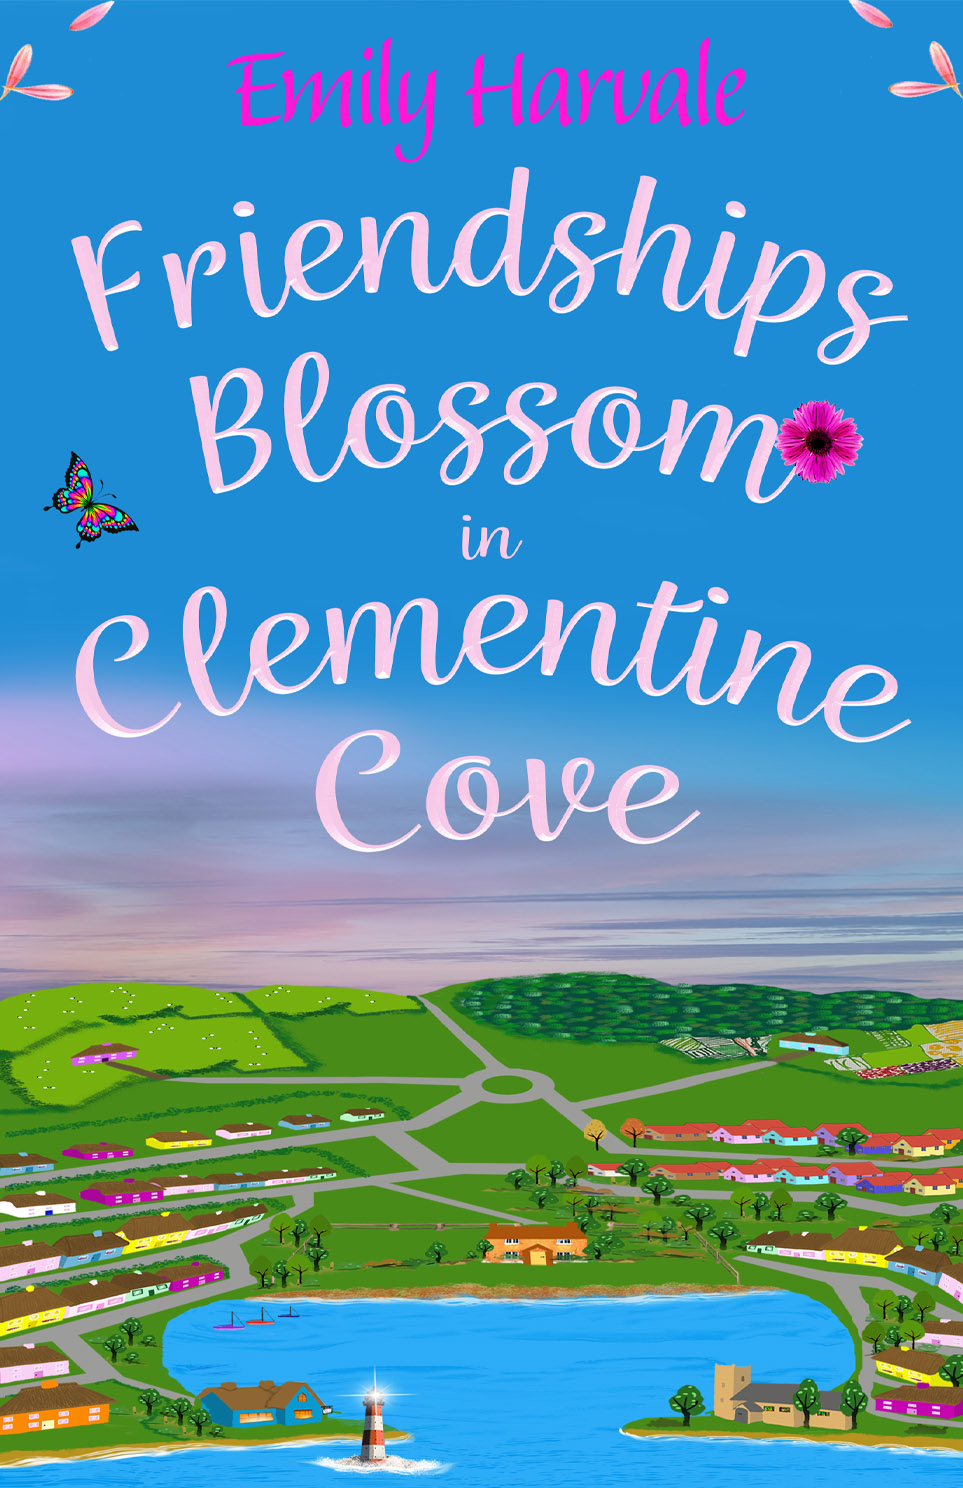 Friendships Blossom in Clementine Cove